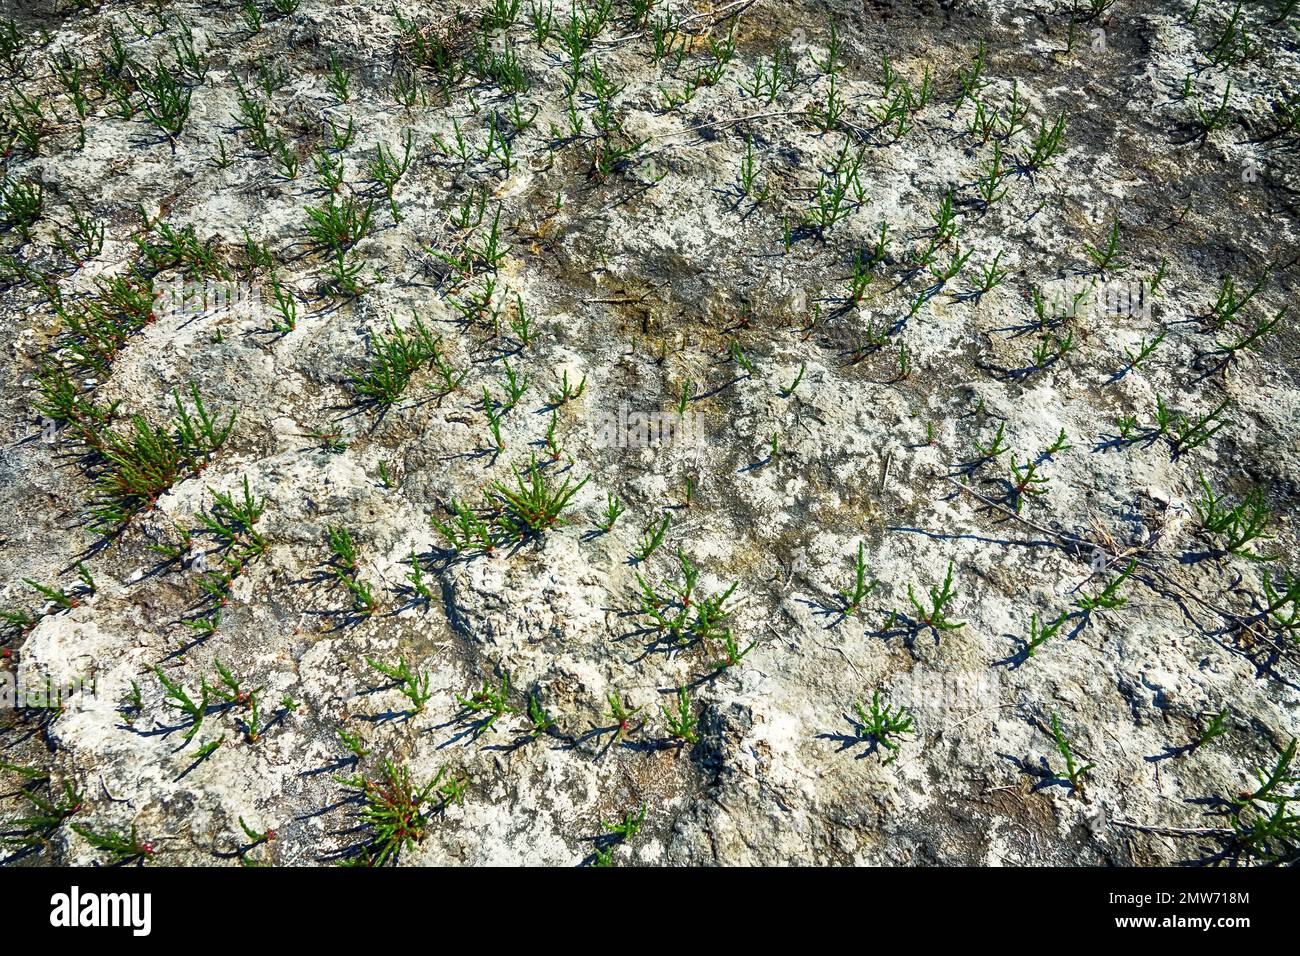 The salt marsh is quickly colonized by Saltwort (Salicornia europaea) after the spring flood and drought. Saltwort as the most salt-tolerant plant Stock Photo